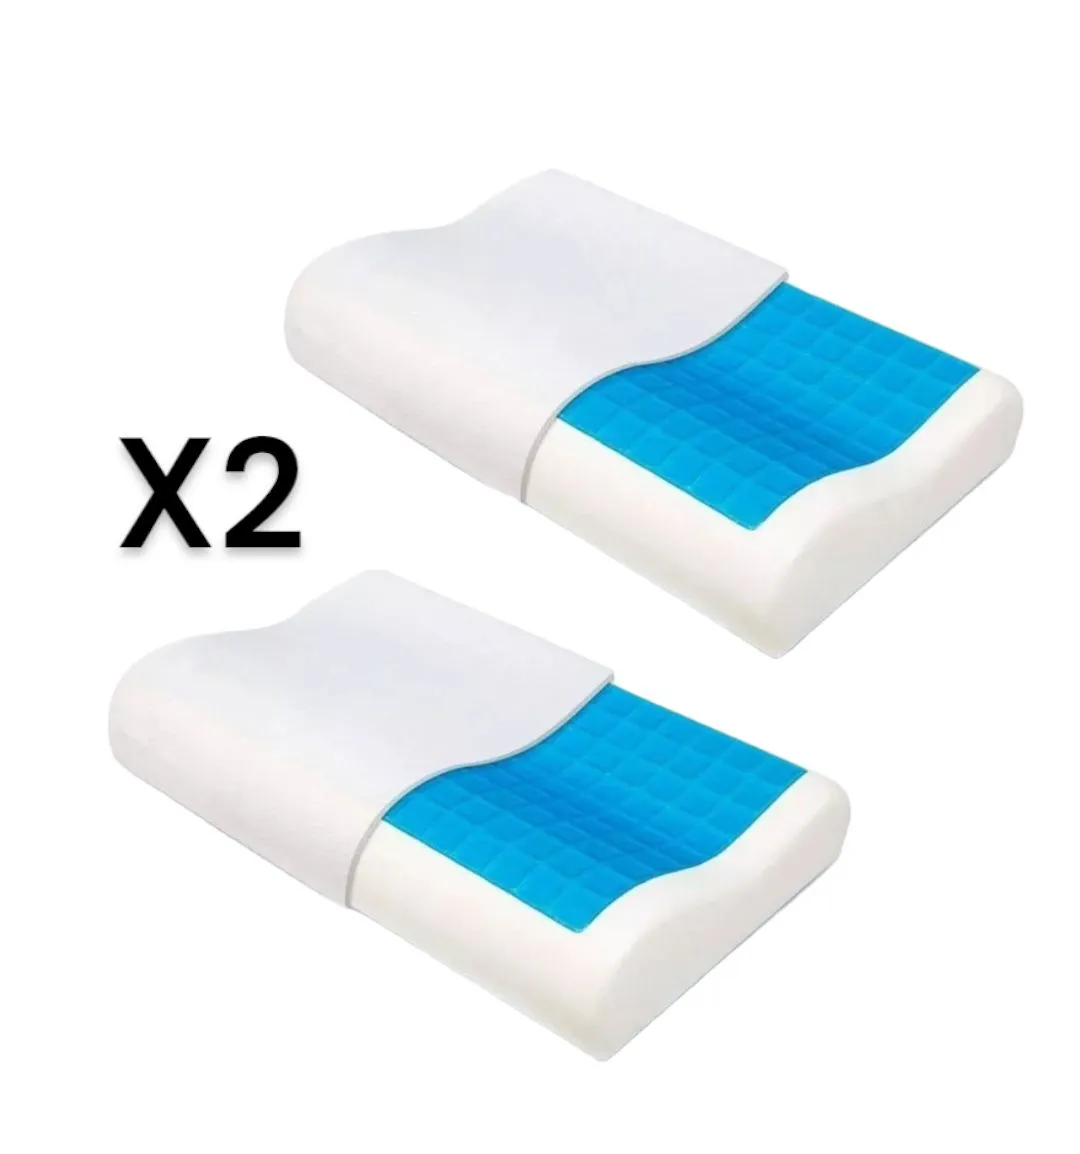 Combo Dos Almohadas Memory Pillow Ortopédica Indeformables Cool Gel Fund